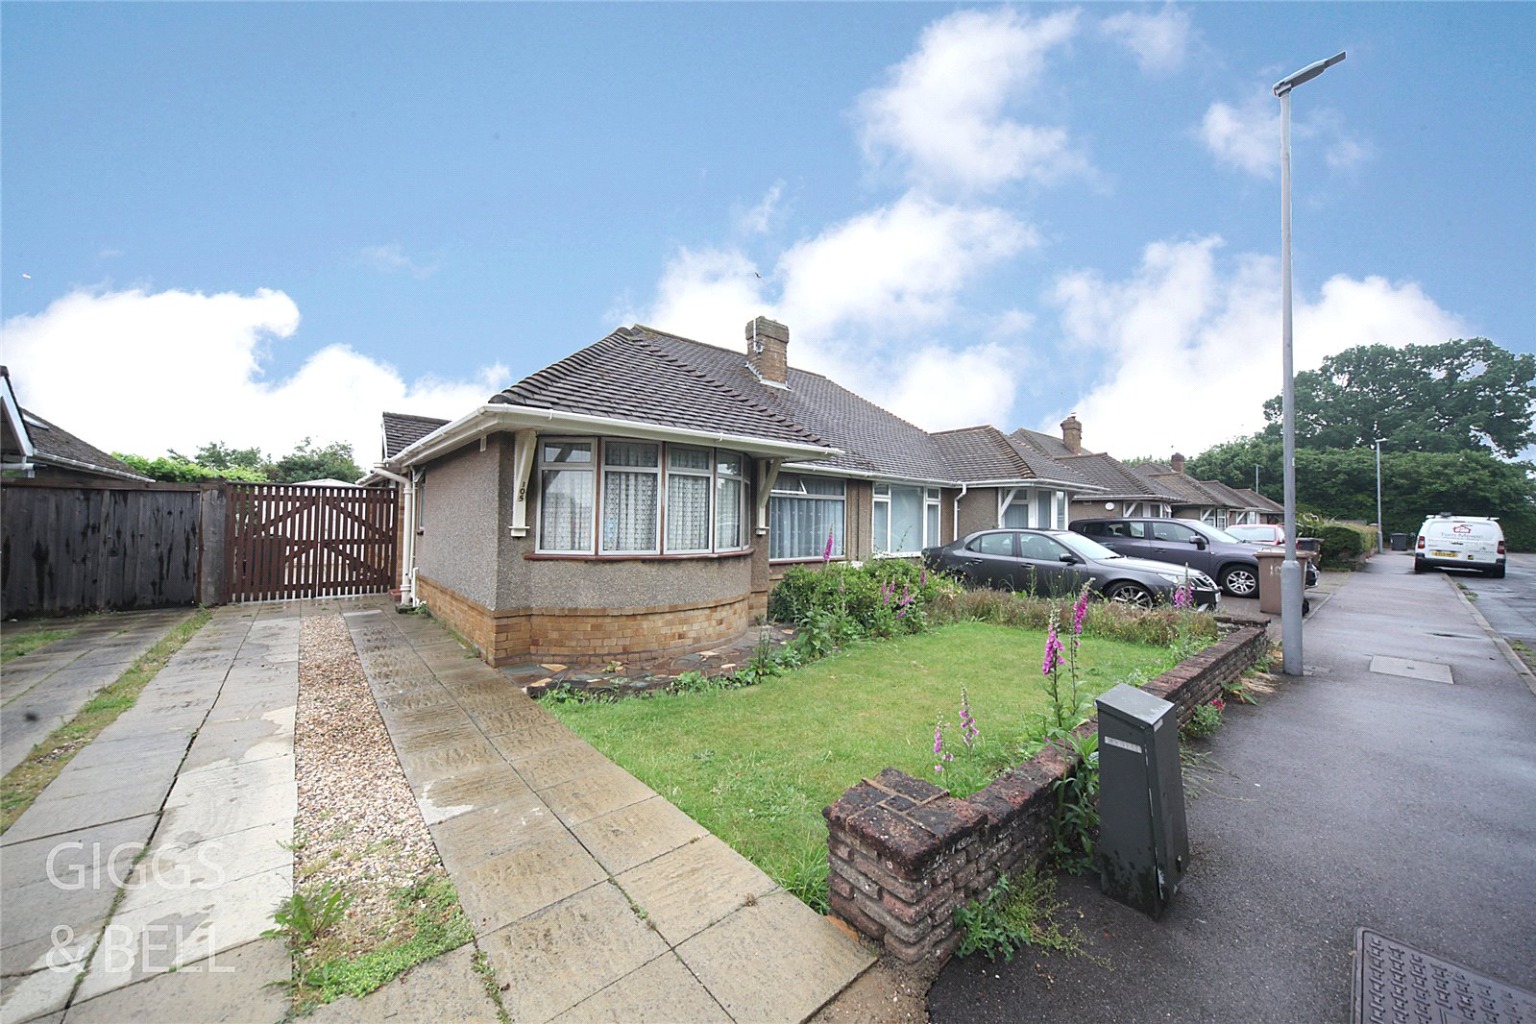 2 bed semi-detached bungalow for sale in Stopsley Way, Luton - Property Image 1